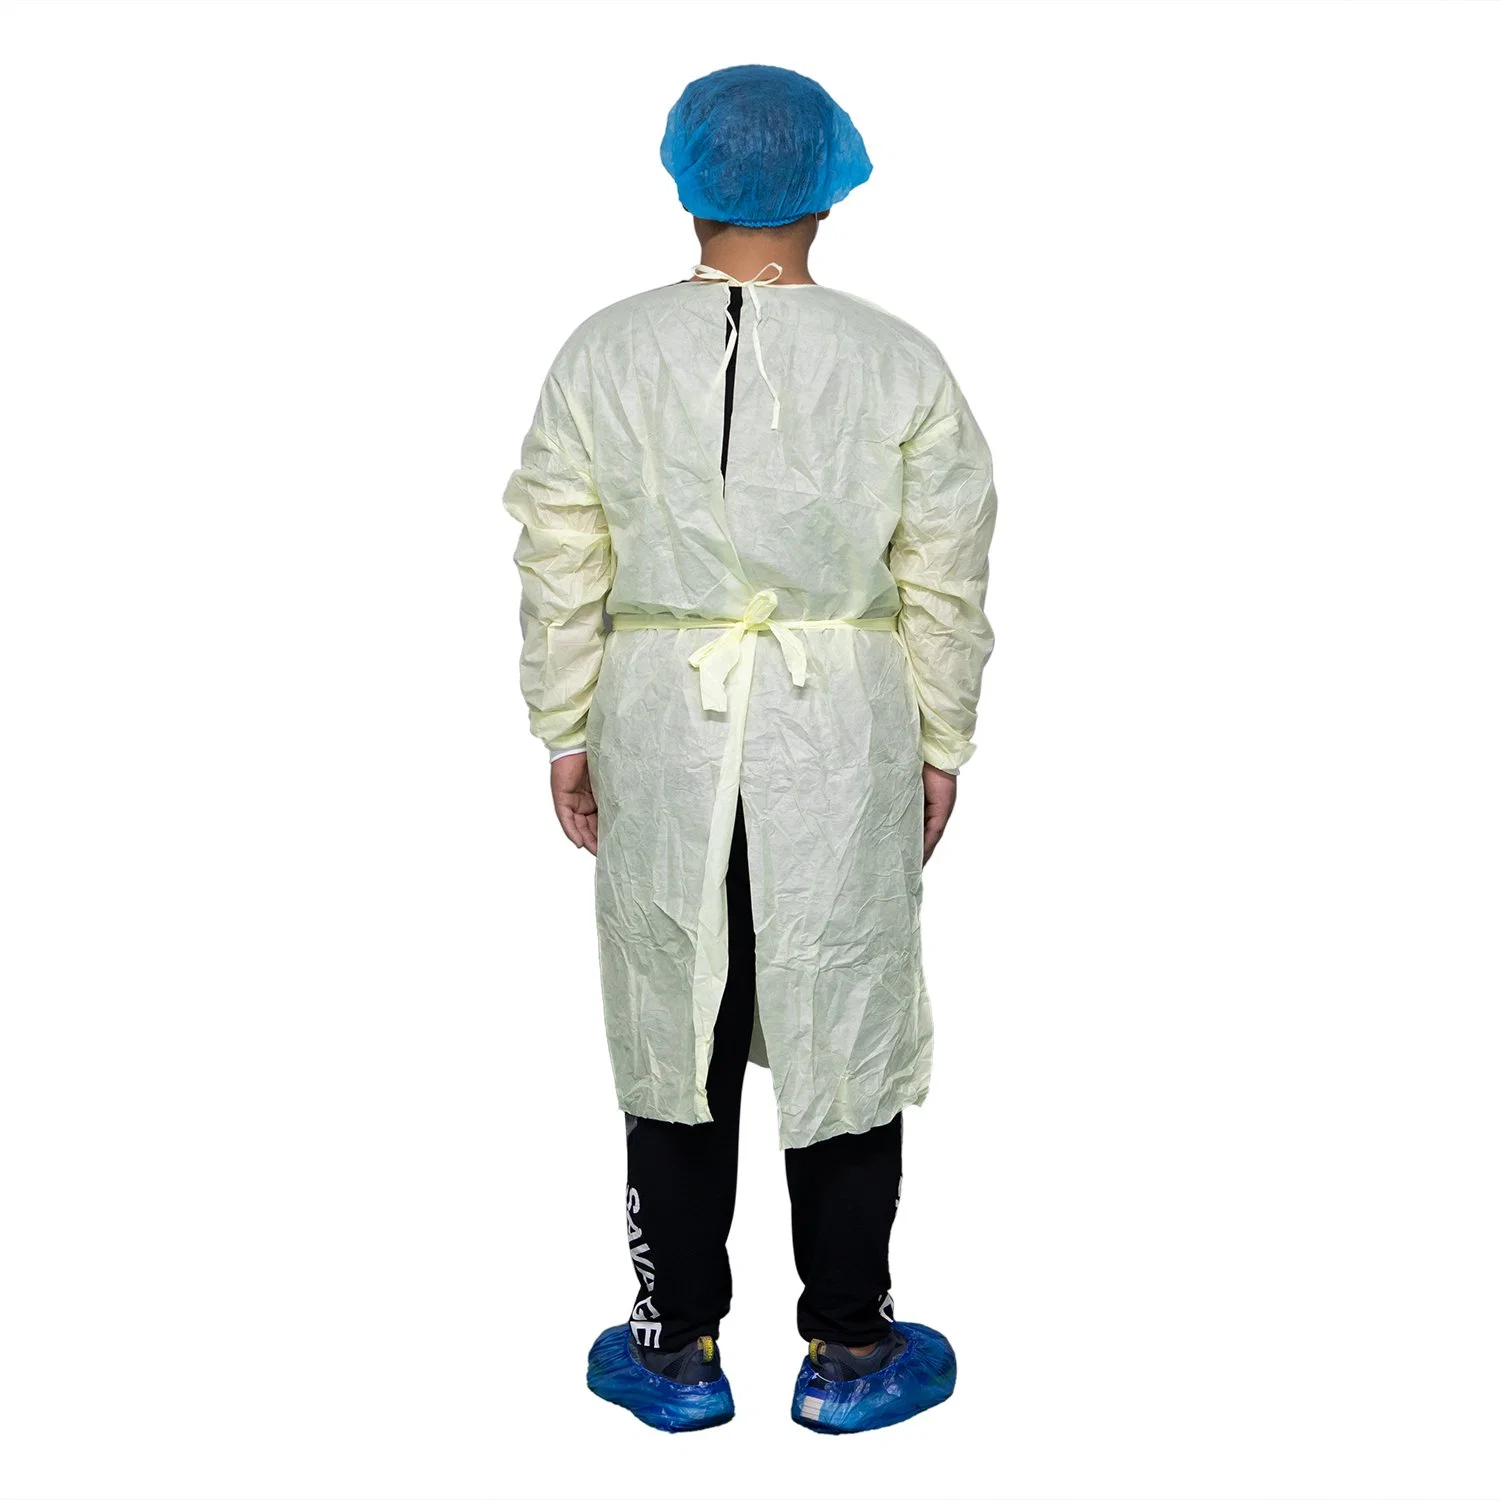 Level 4 SMS Hospital Medical Disposable Protective Surgical Isolation Gown